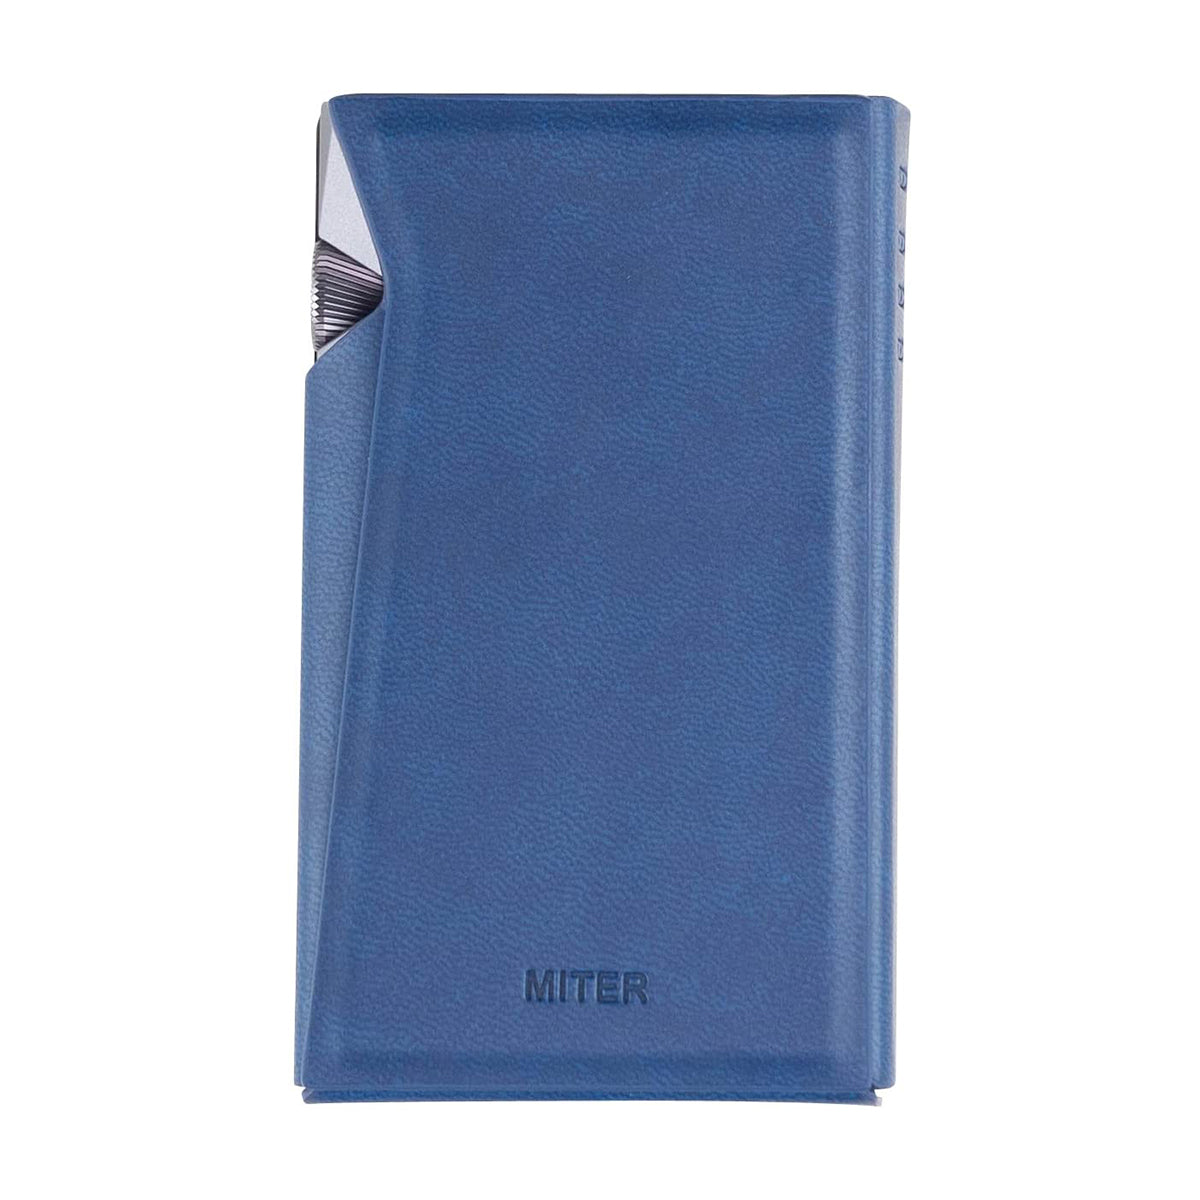 MITER Artificial Leather Case for Astell & Kern SR25 MKII / SR25